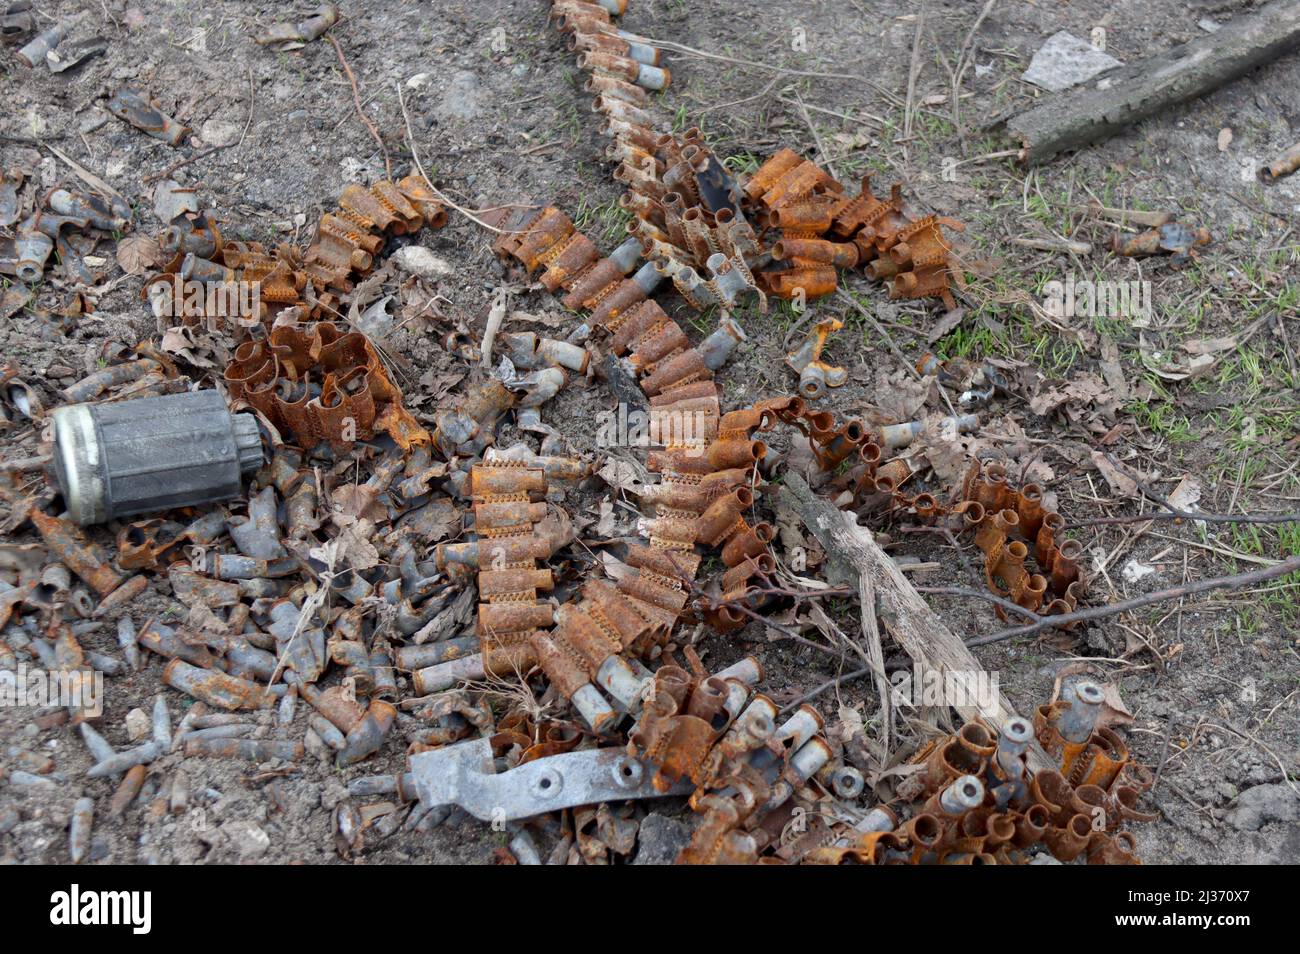 BUCHA, UKRAINE - APRIL 5, 2022 - A used ammunition belt is seen on the ground in Vokzalna Street following the liberation of the city from Russian inv Stock Photo